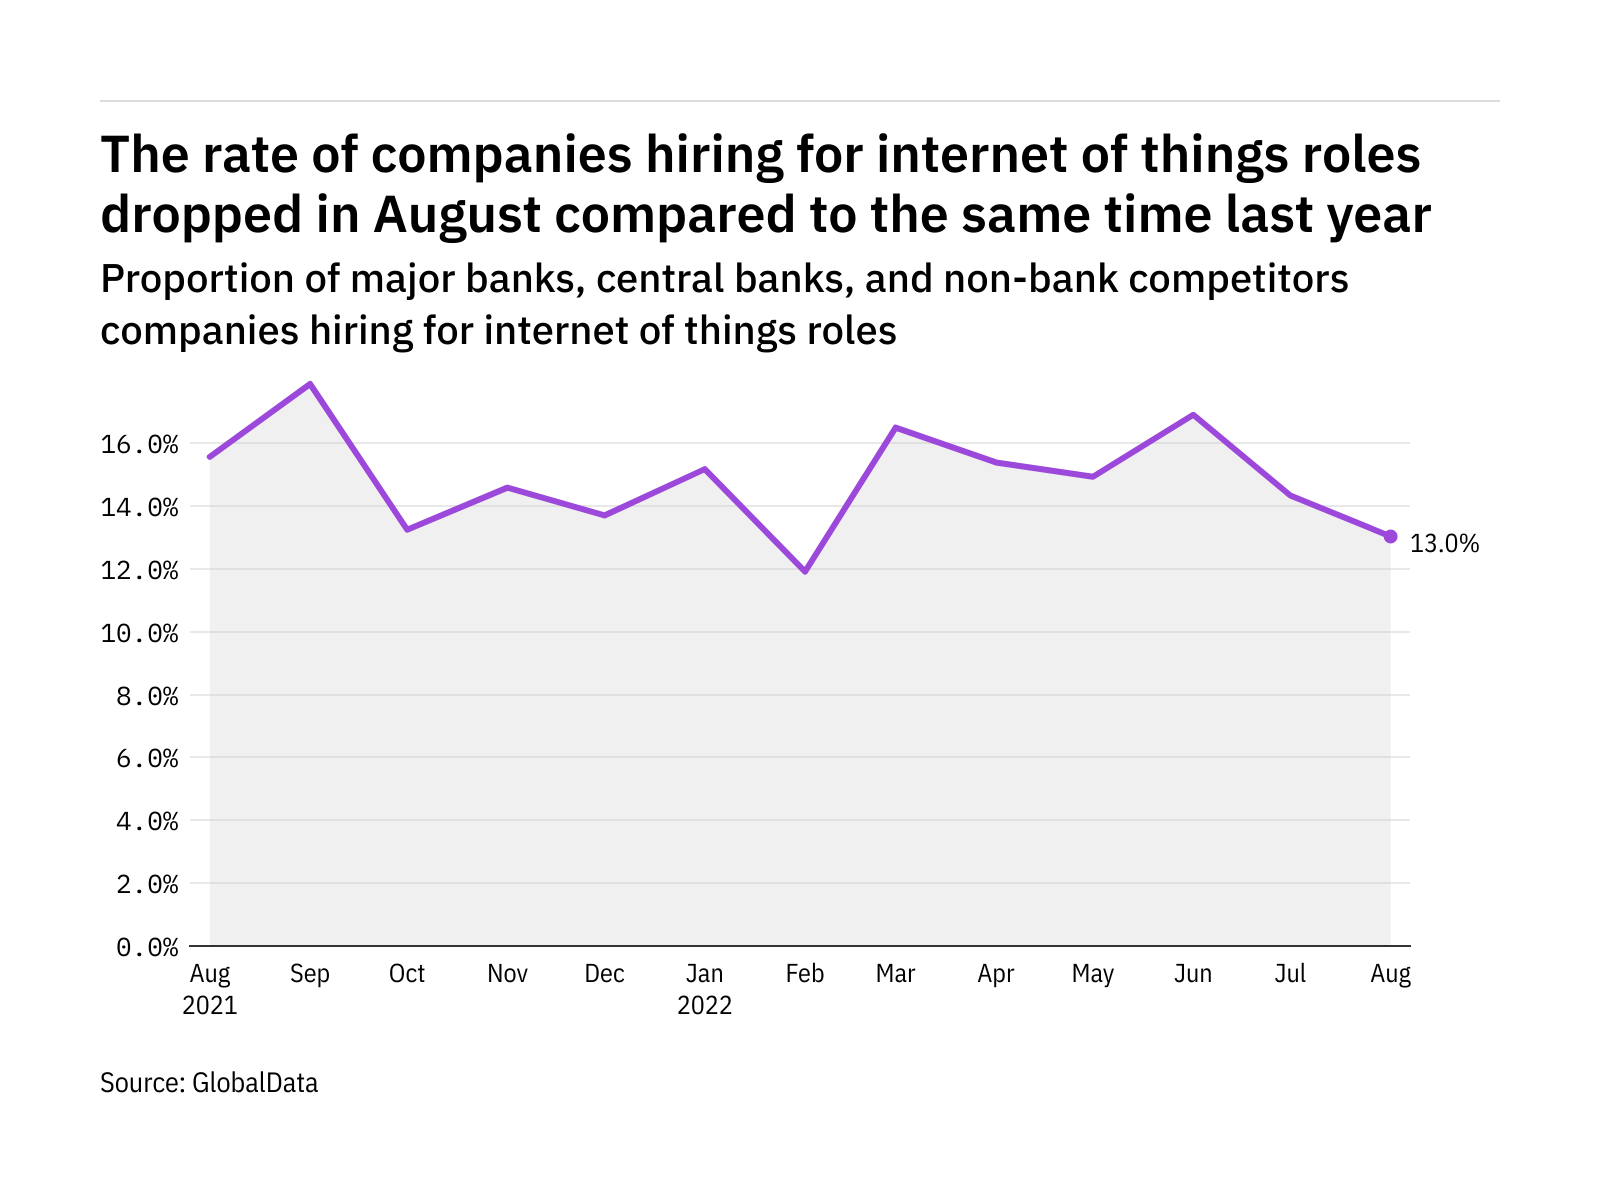 Internet of things hiring levels in the retail banking industry dropped in August 2022